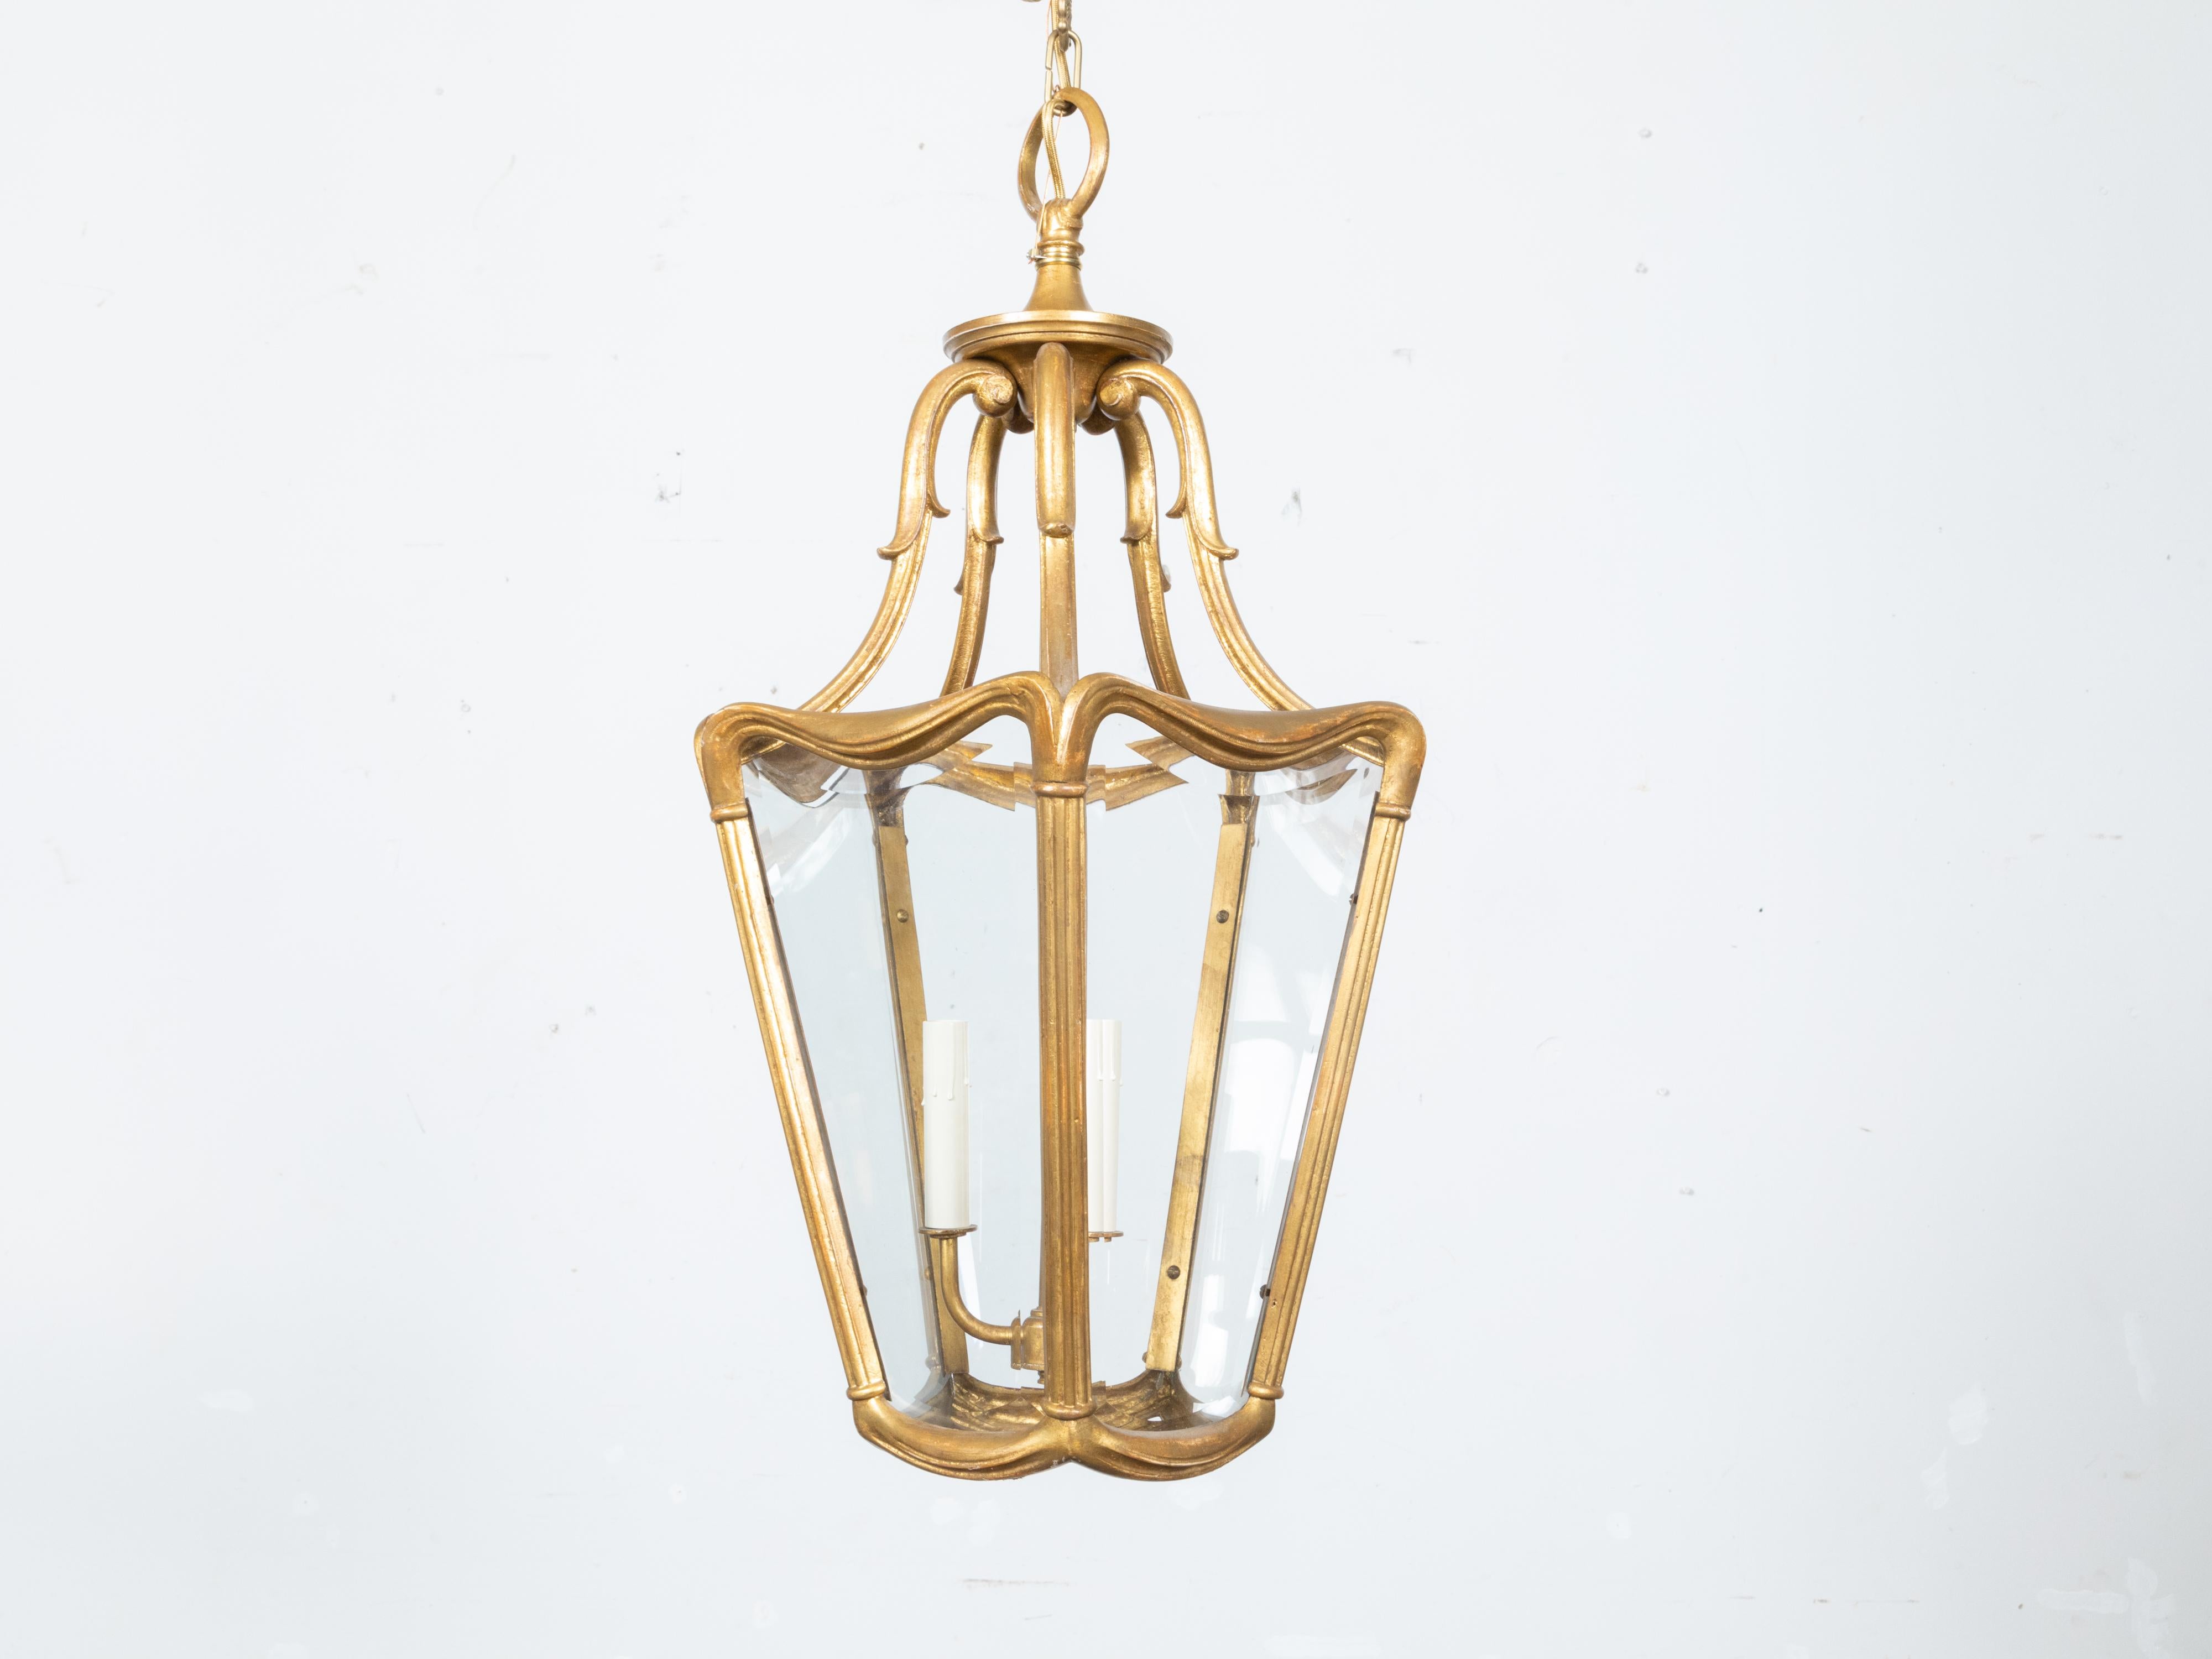 Art Nouveau Style Gilt Metal Three-Light Lantern with Subtle Scrolling Effects In Good Condition For Sale In Atlanta, GA